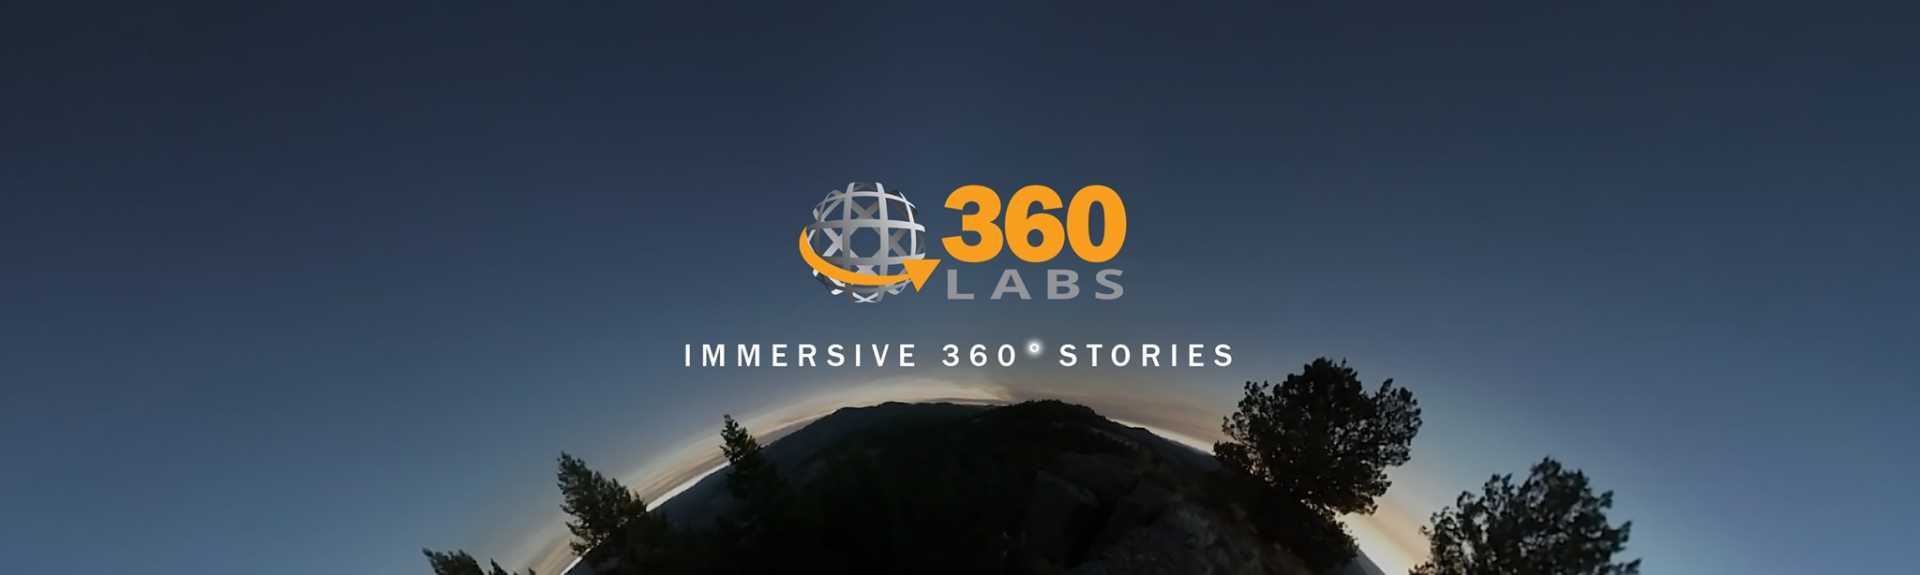 360 Labs: Immersive 360 Stories